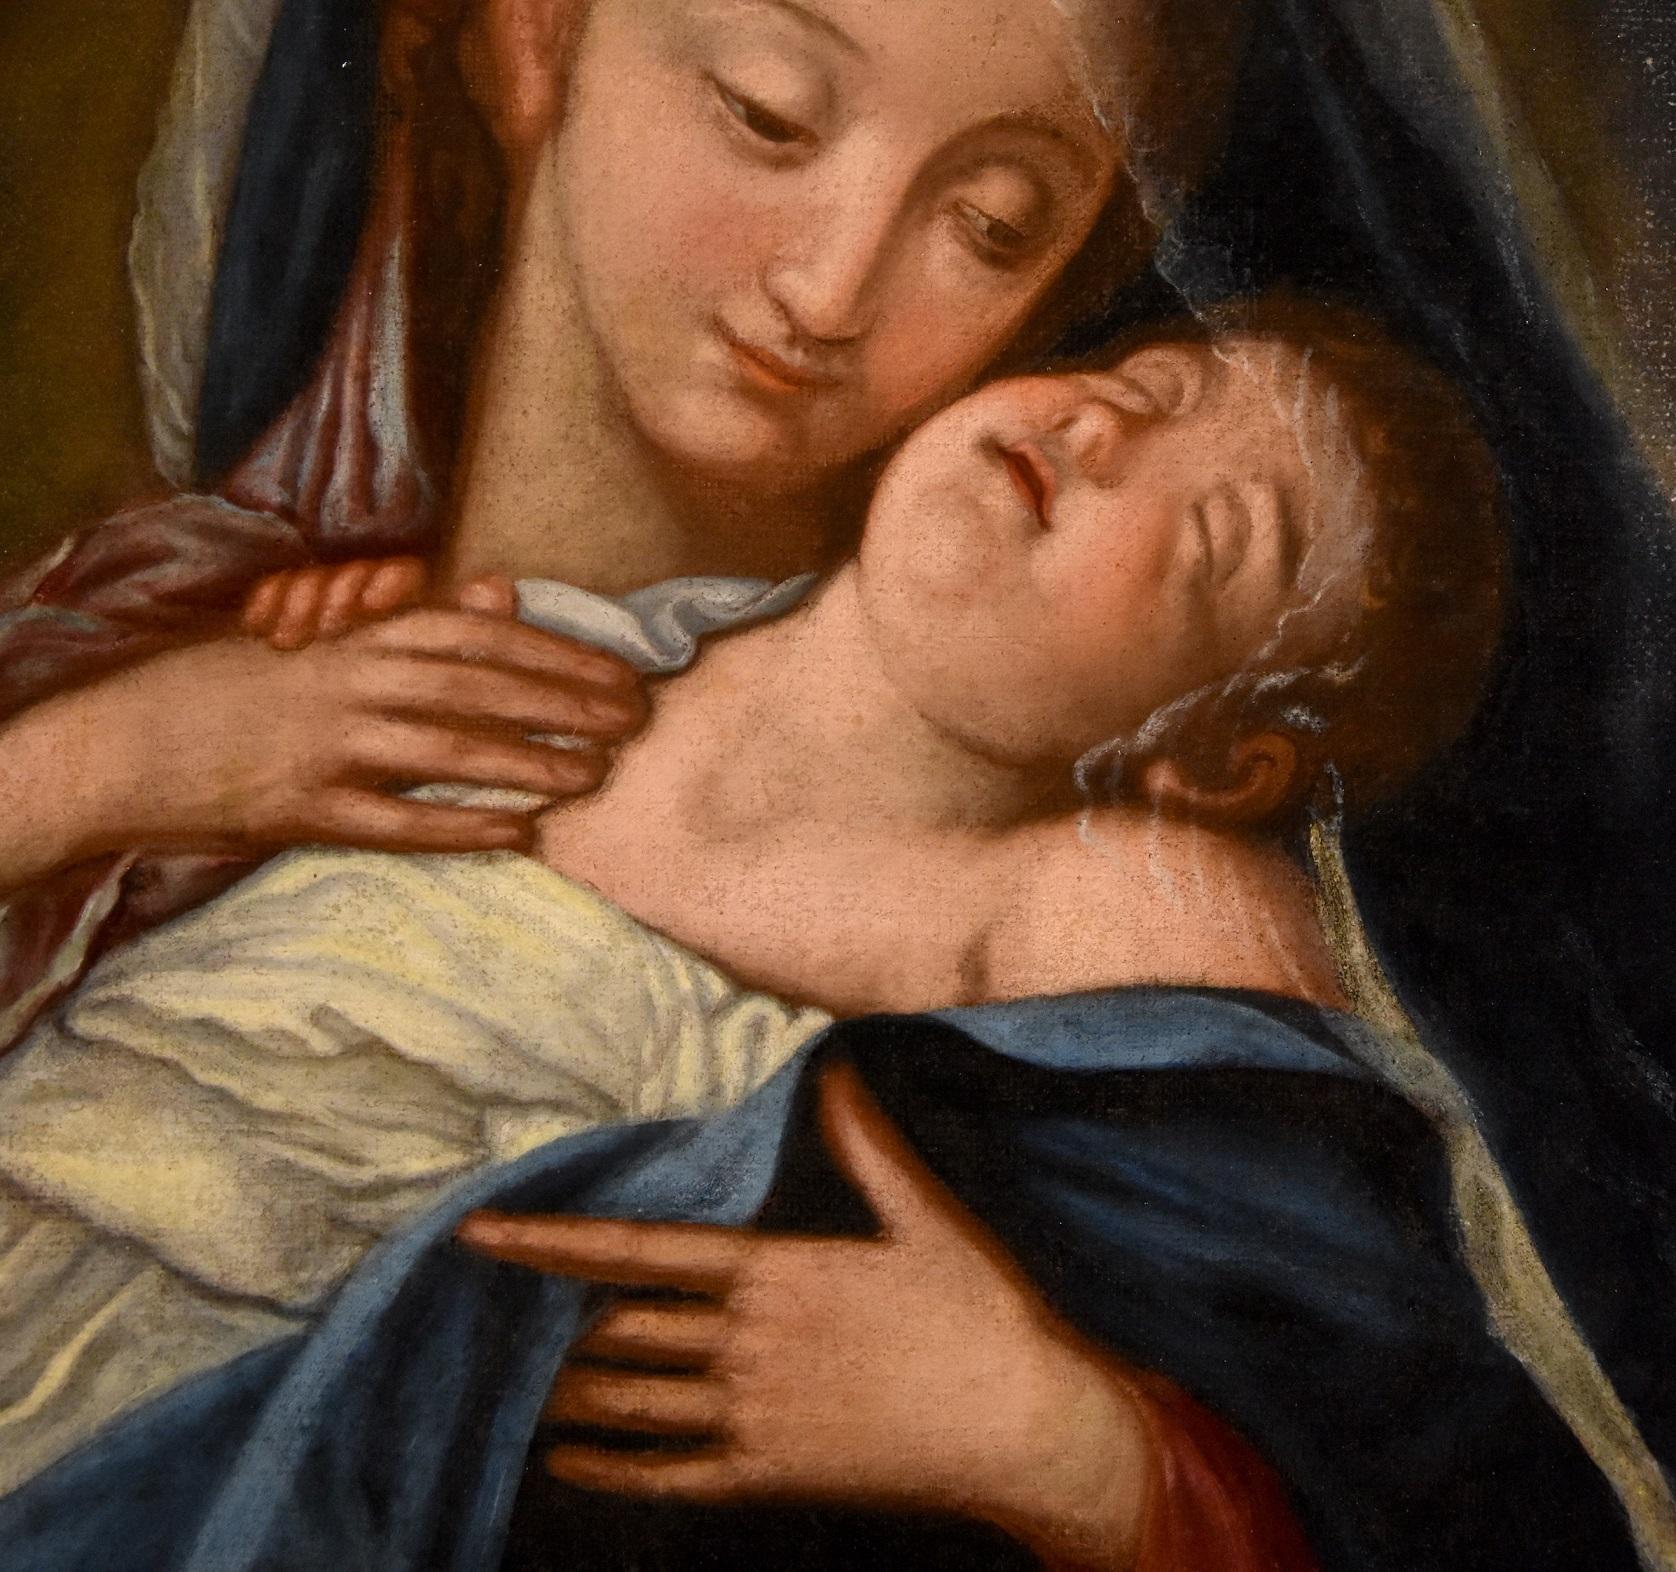 Madonna with Sleeping Child
Follower of Giovan Battista Salvi known as 'il Sassoferrato' (1609 - 1685)

Roman painter 18th century
Oil on canvas
Measurements: canvas 64 x 50 cm, in frame 76 x 62 cm.

This delicate depiction of the Madonna in